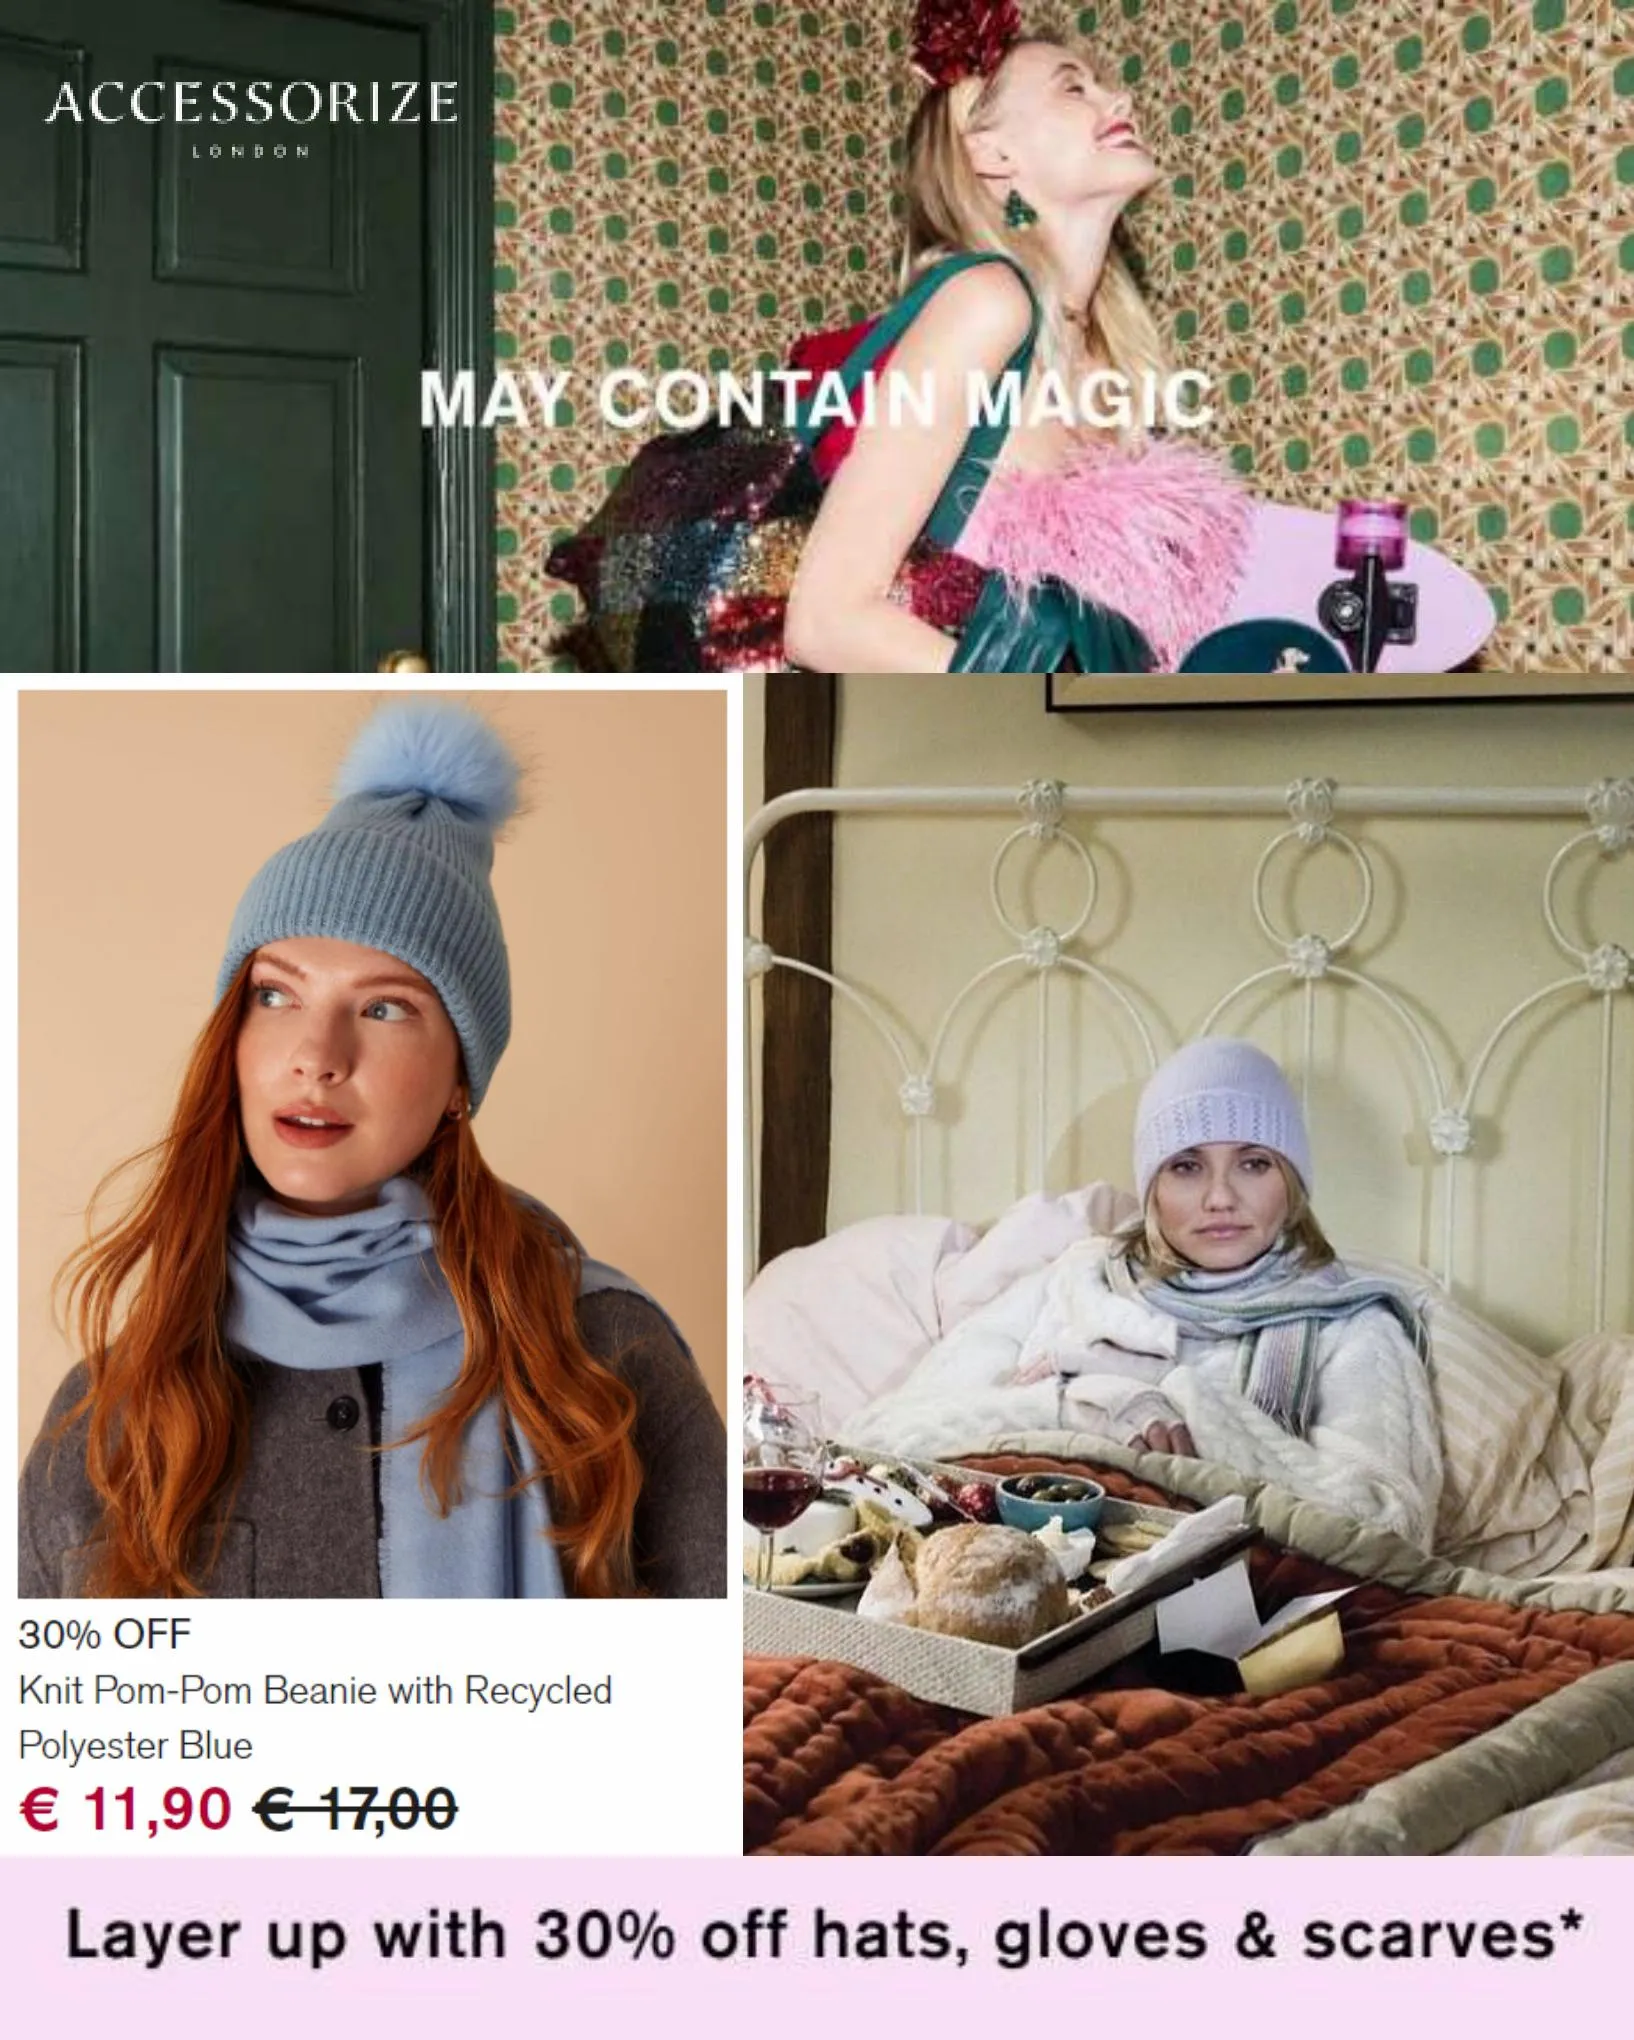 Catalogue 30% Off Hats, Gloves & Scarves*, page 00001